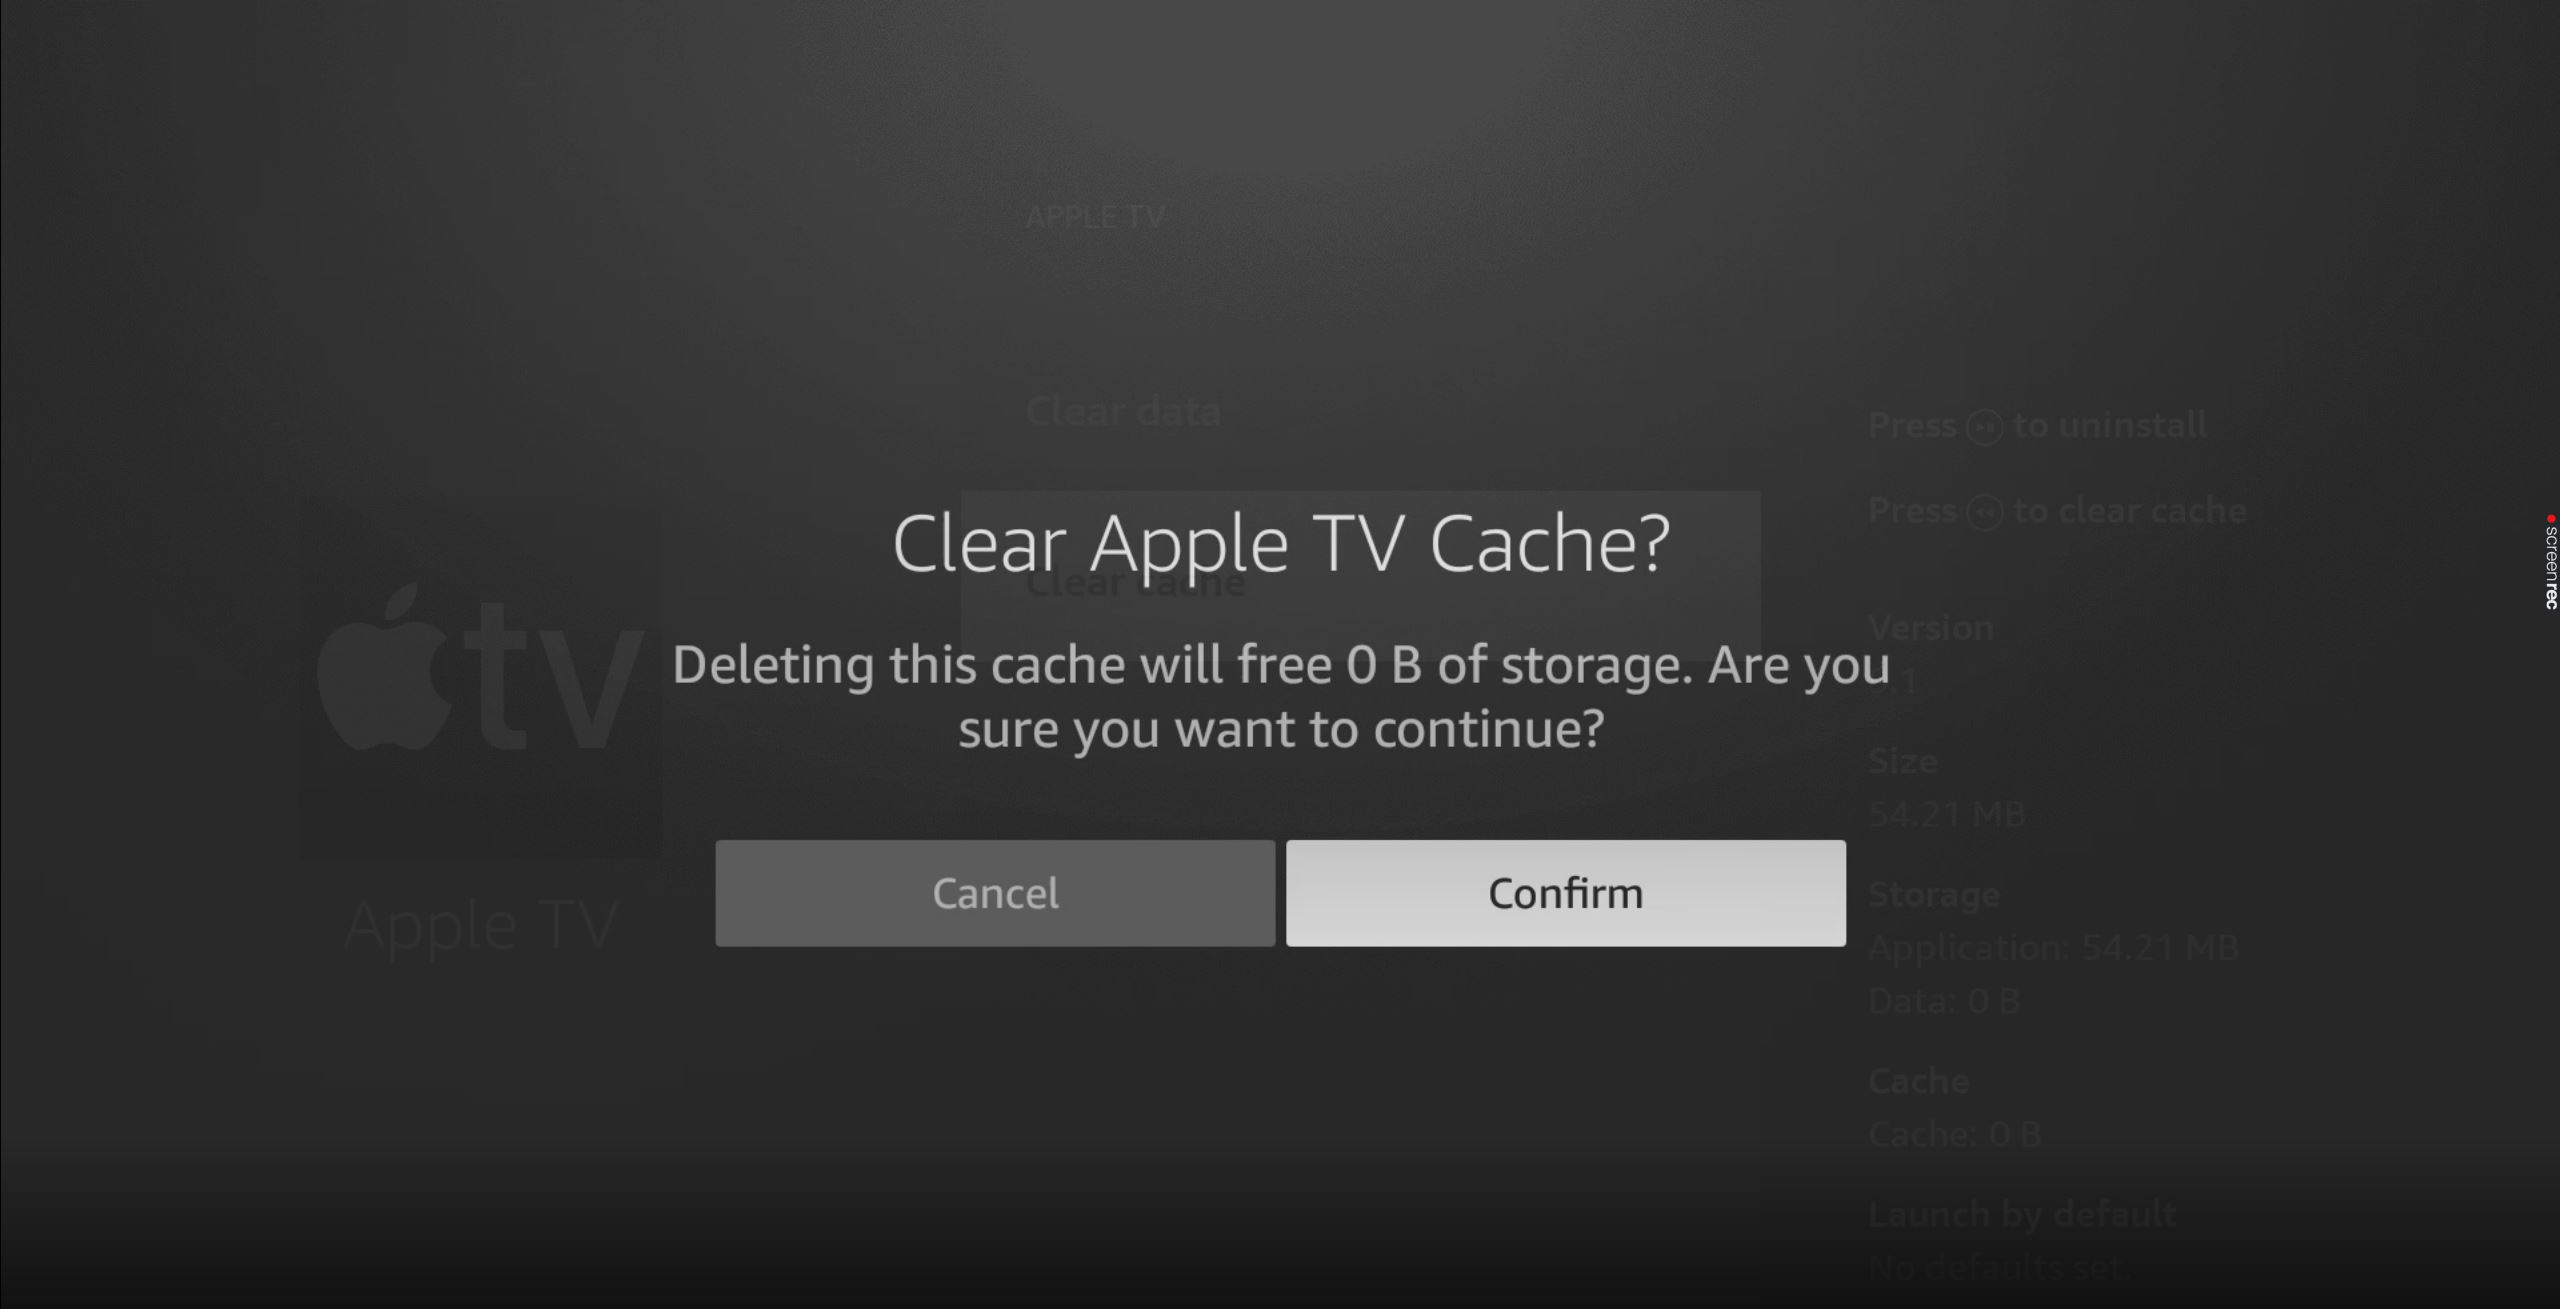 How to confirm clearing Apple TV's cache on Amazon Firestick